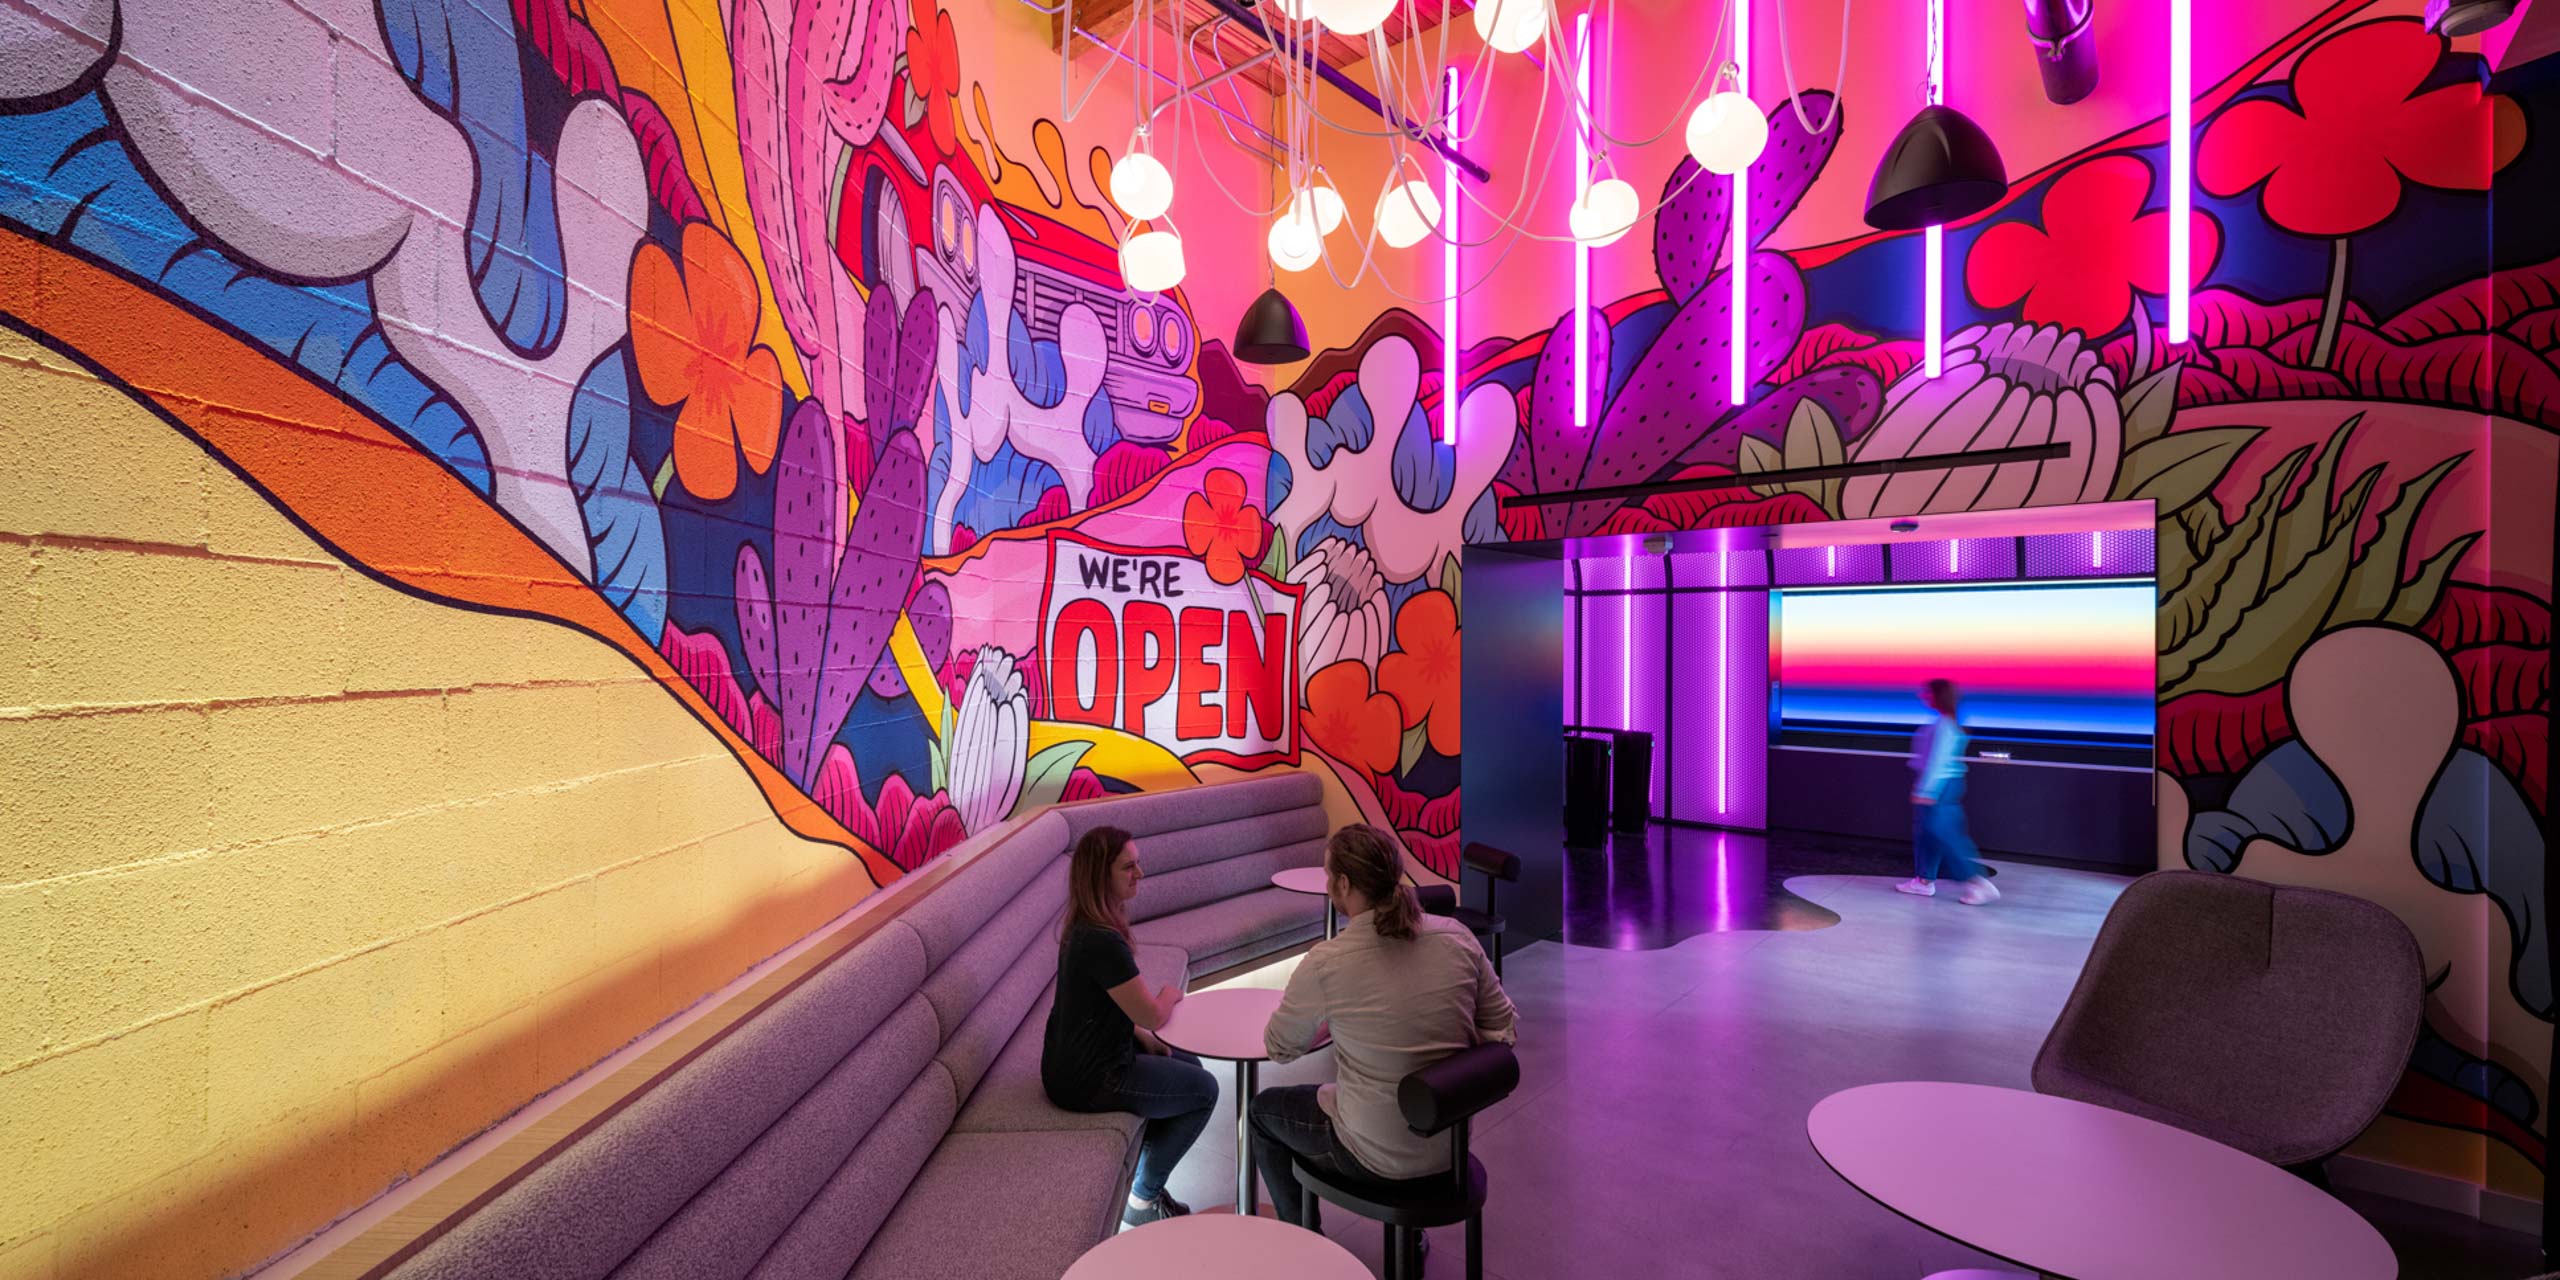 Lounge area with colorful painted wall mural and vibrant lights at Spotify